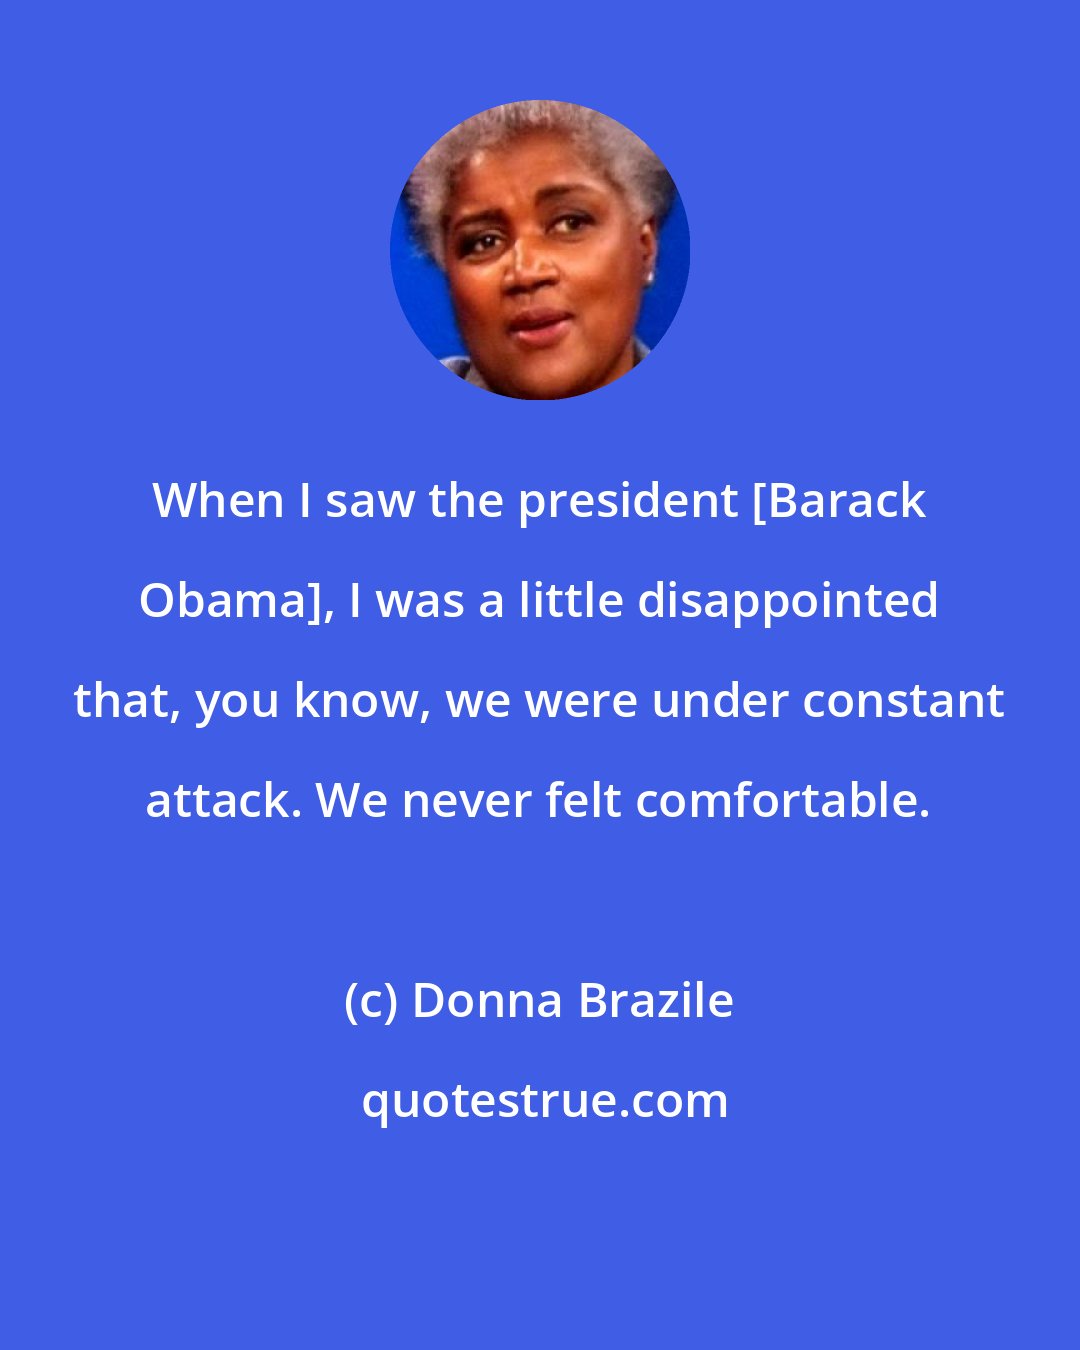 Donna Brazile: When I saw the president [Barack Obama], I was a little disappointed that, you know, we were under constant attack. We never felt comfortable.